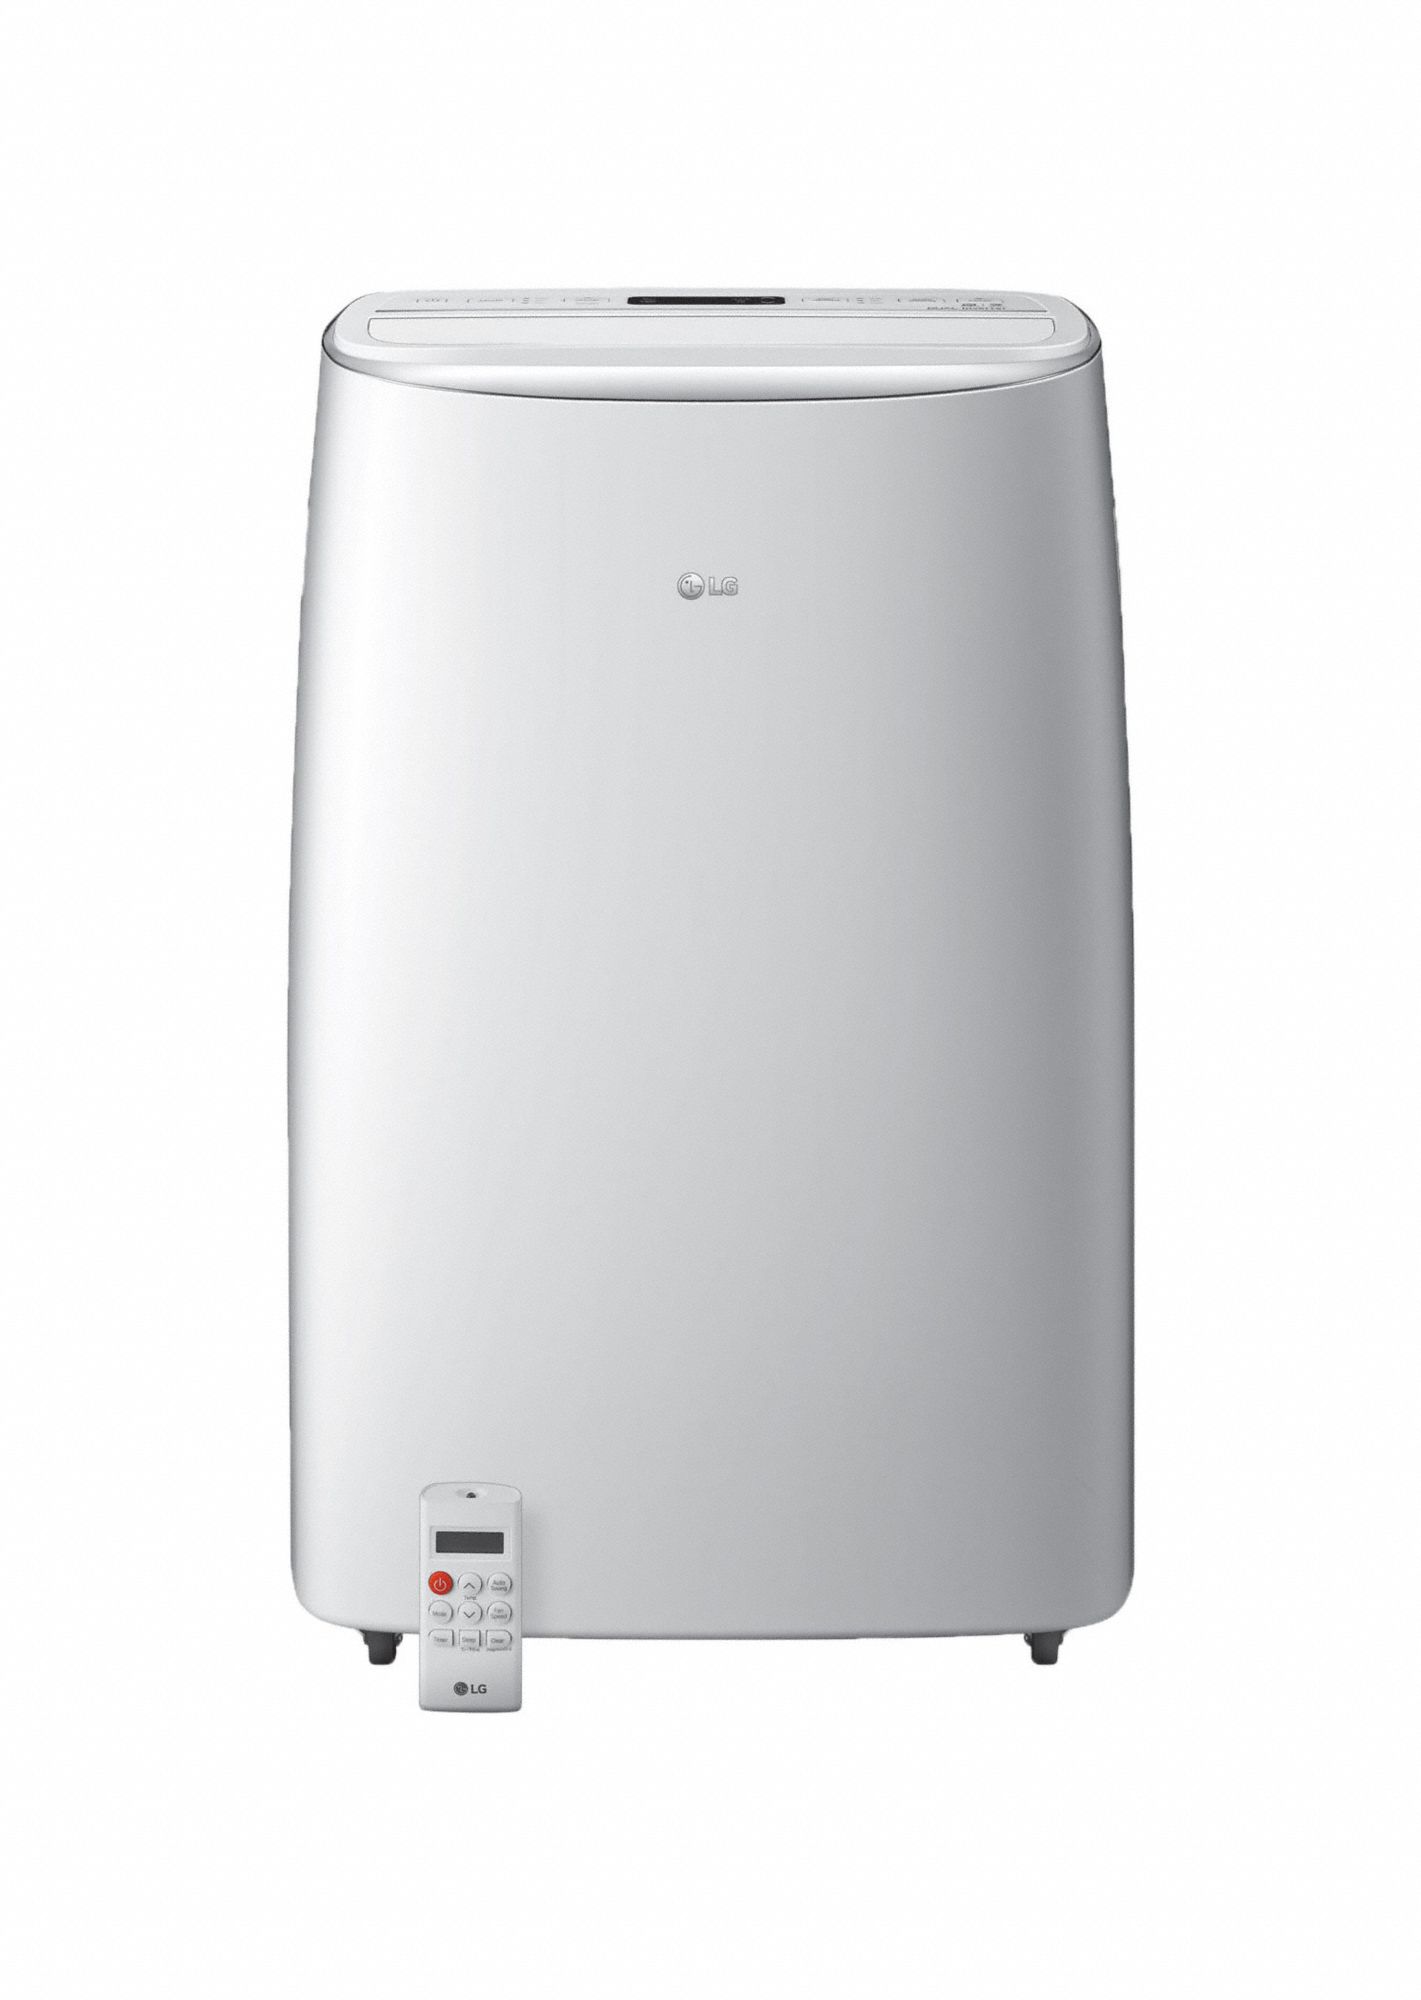 Portable Air Conditioner: 10,000 BtuH BtuH Cooling - DOE SACC, 400 to 450 sq ft